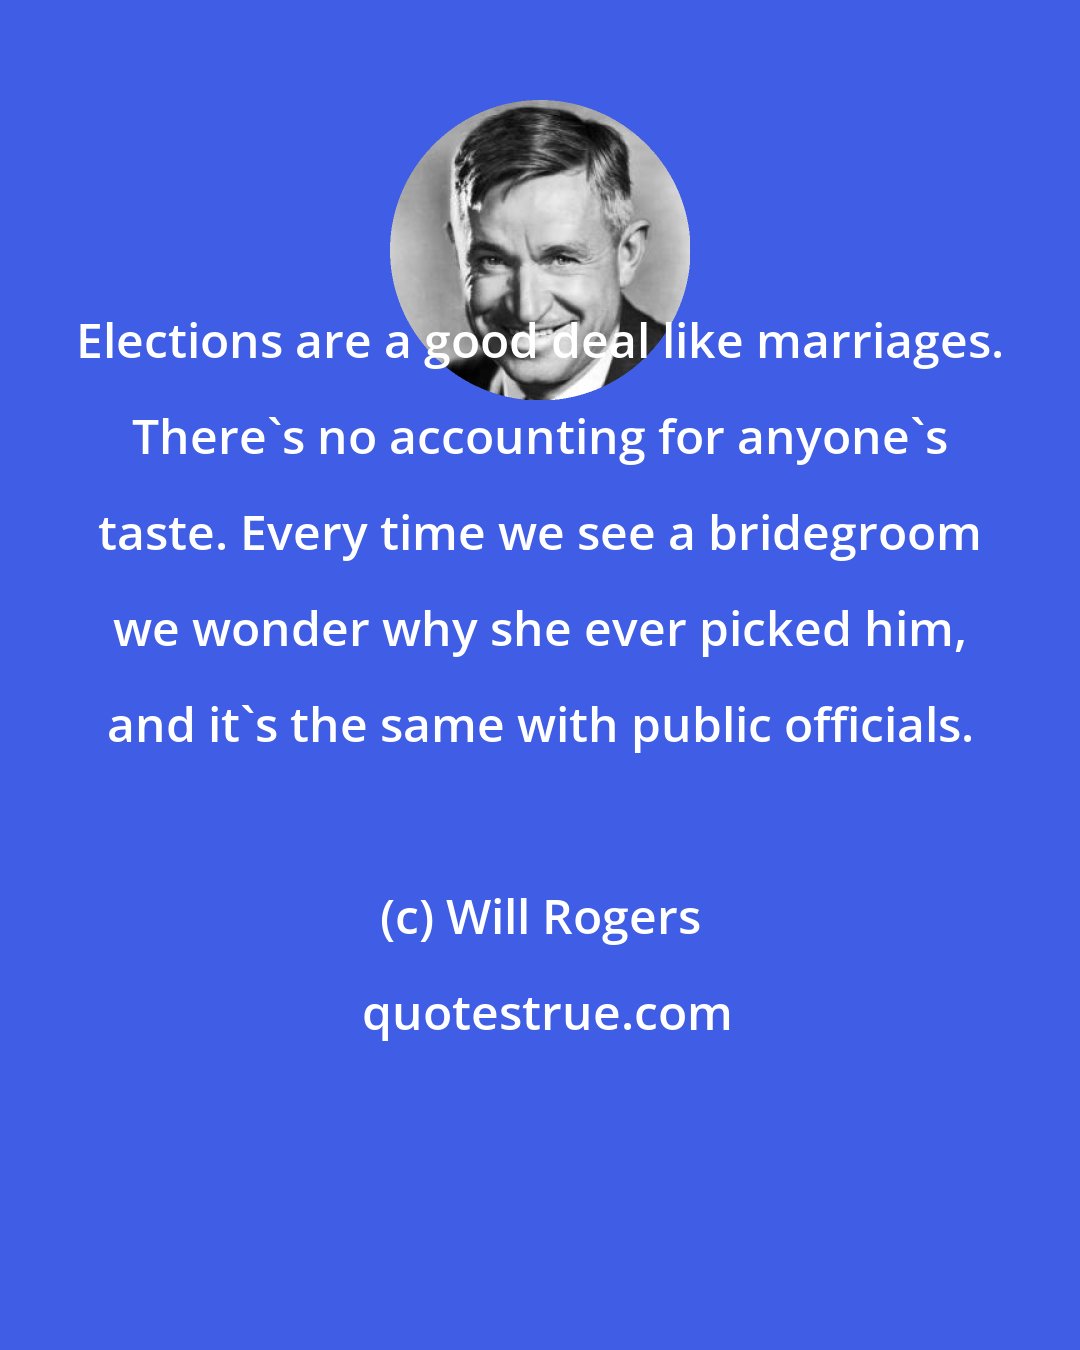 Will Rogers: Elections are a good deal like marriages. There's no accounting for anyone's taste. Every time we see a bridegroom we wonder why she ever picked him, and it's the same with public officials.